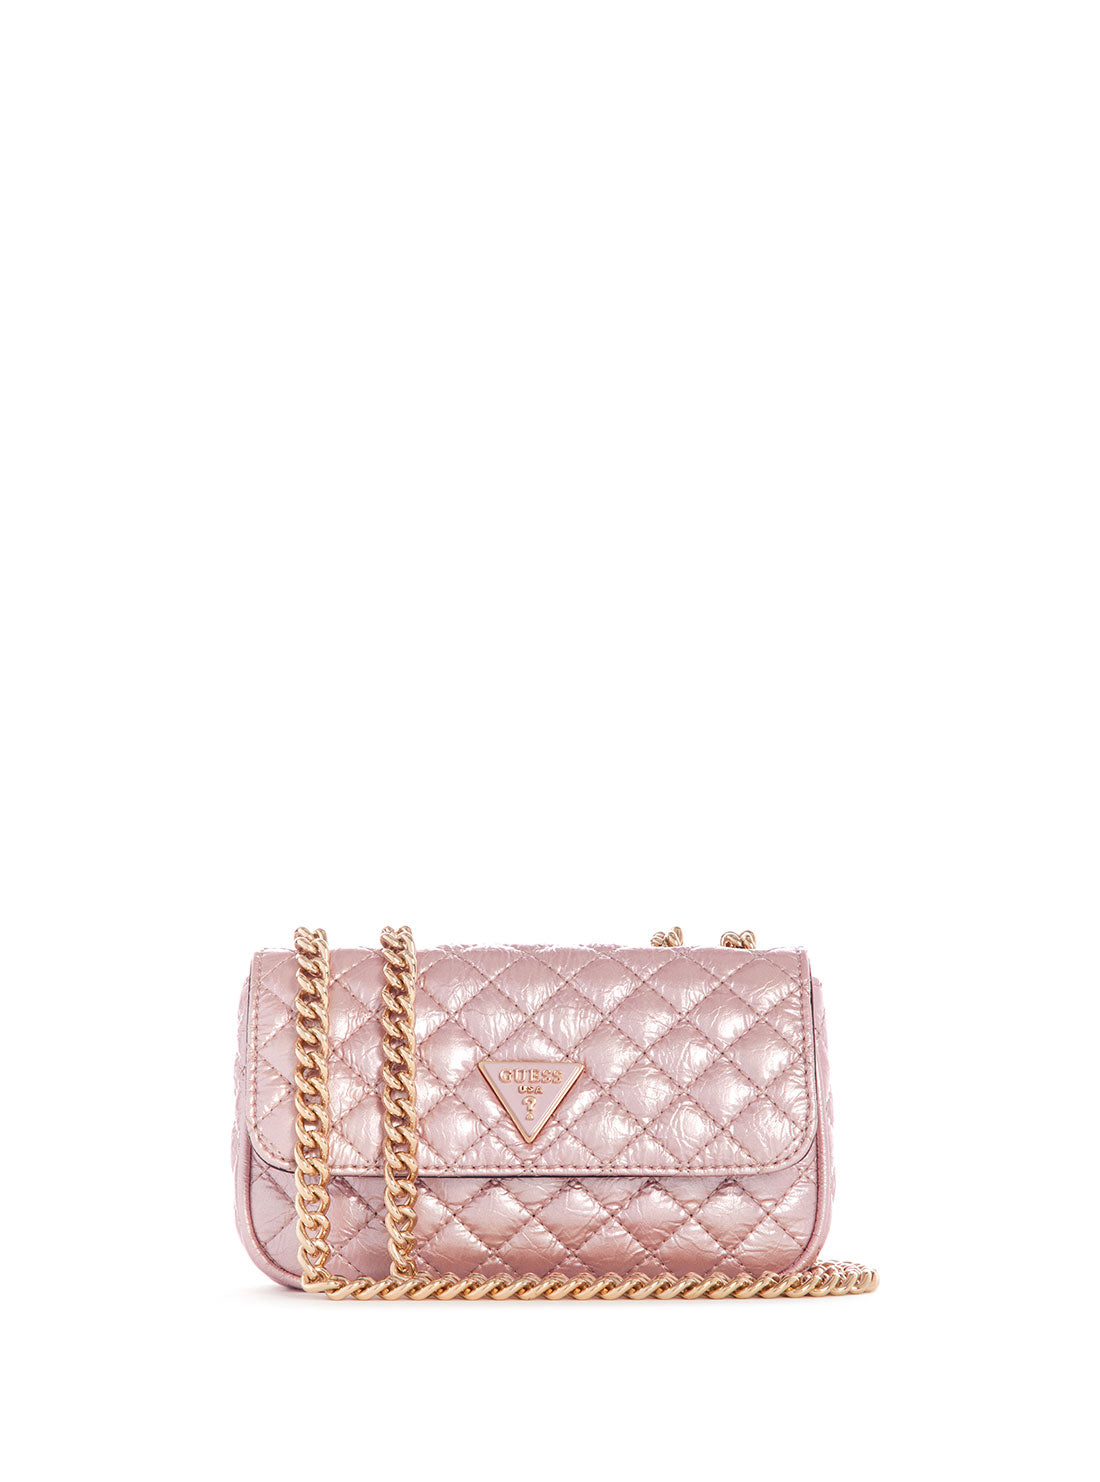 GUESS Women's Rose Spark Quilted Mini Crossbody Bag QH870078 Front View